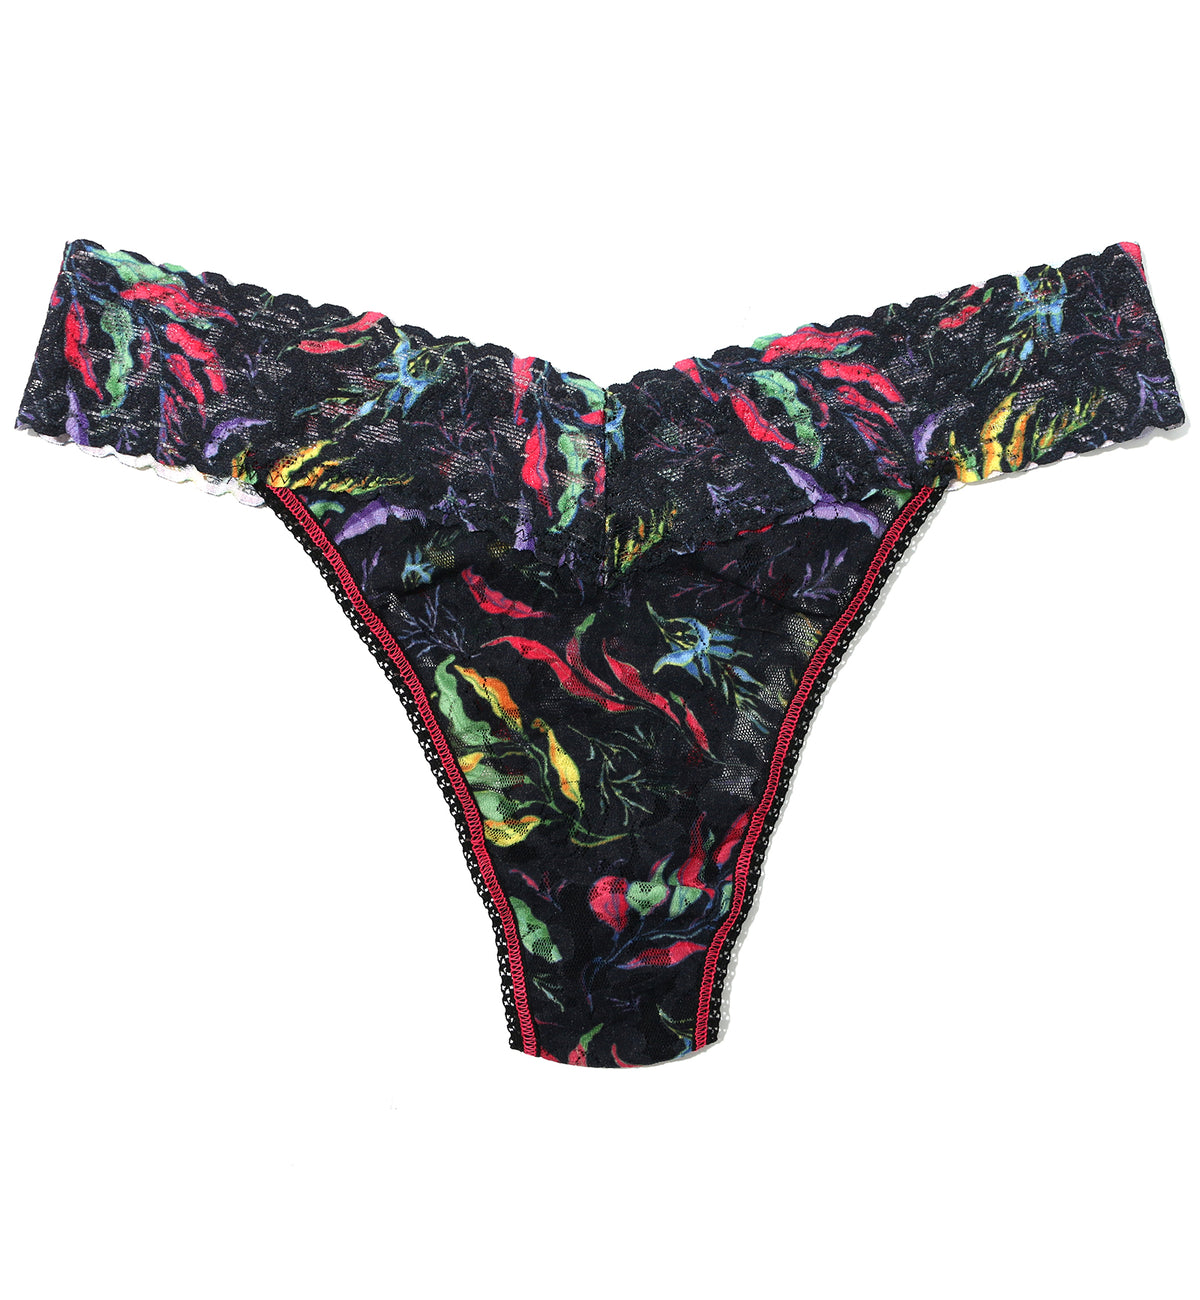 Hanky Panky Signature Lace Printed Original Rise Thong (PR4811P),Floating - Floating,One Size